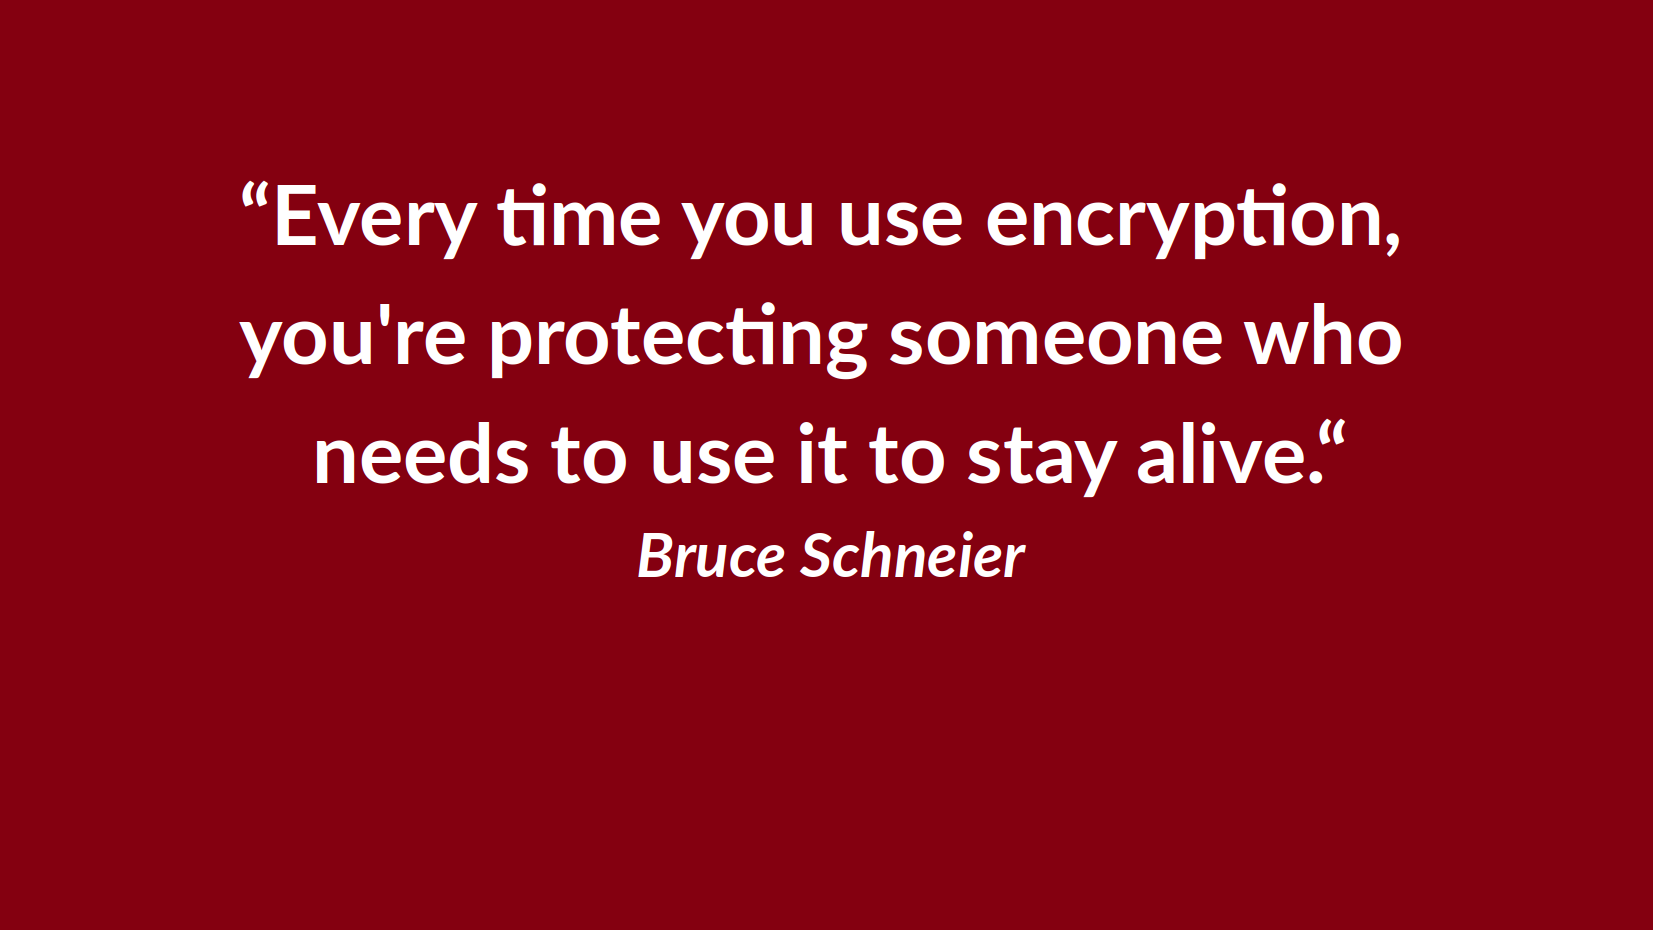 Every time you use encryption, you are protecting someone who needs it to stay alive!